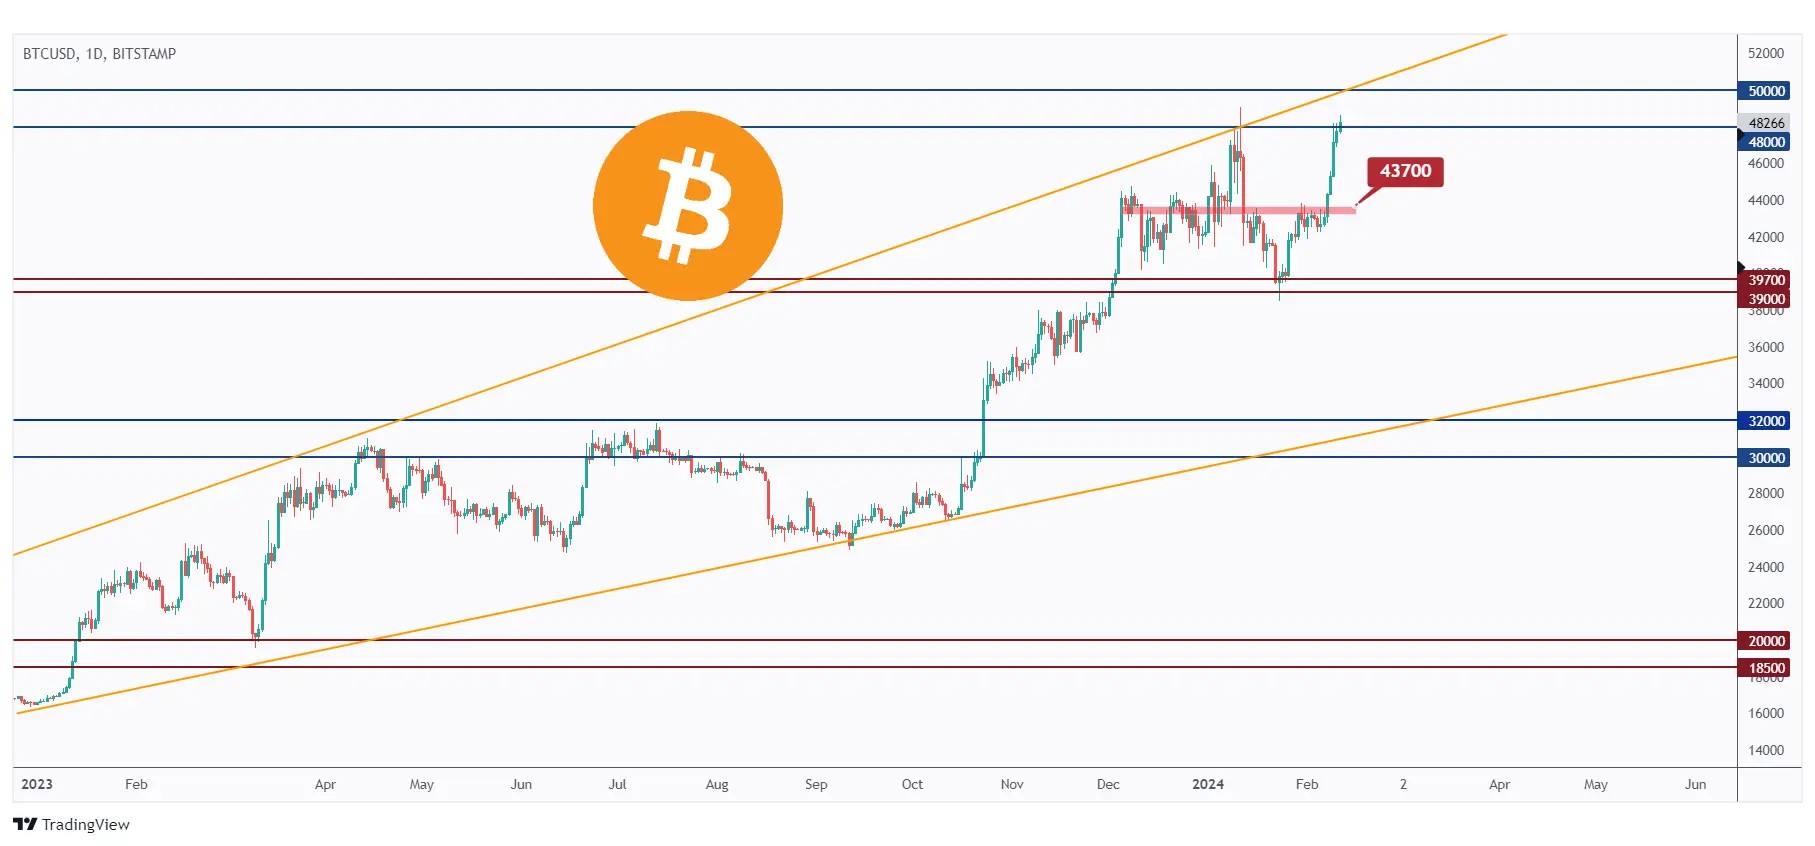 BTC daily chart approaching the $50,000 resistance and upper bound of the rising wedge pattern.